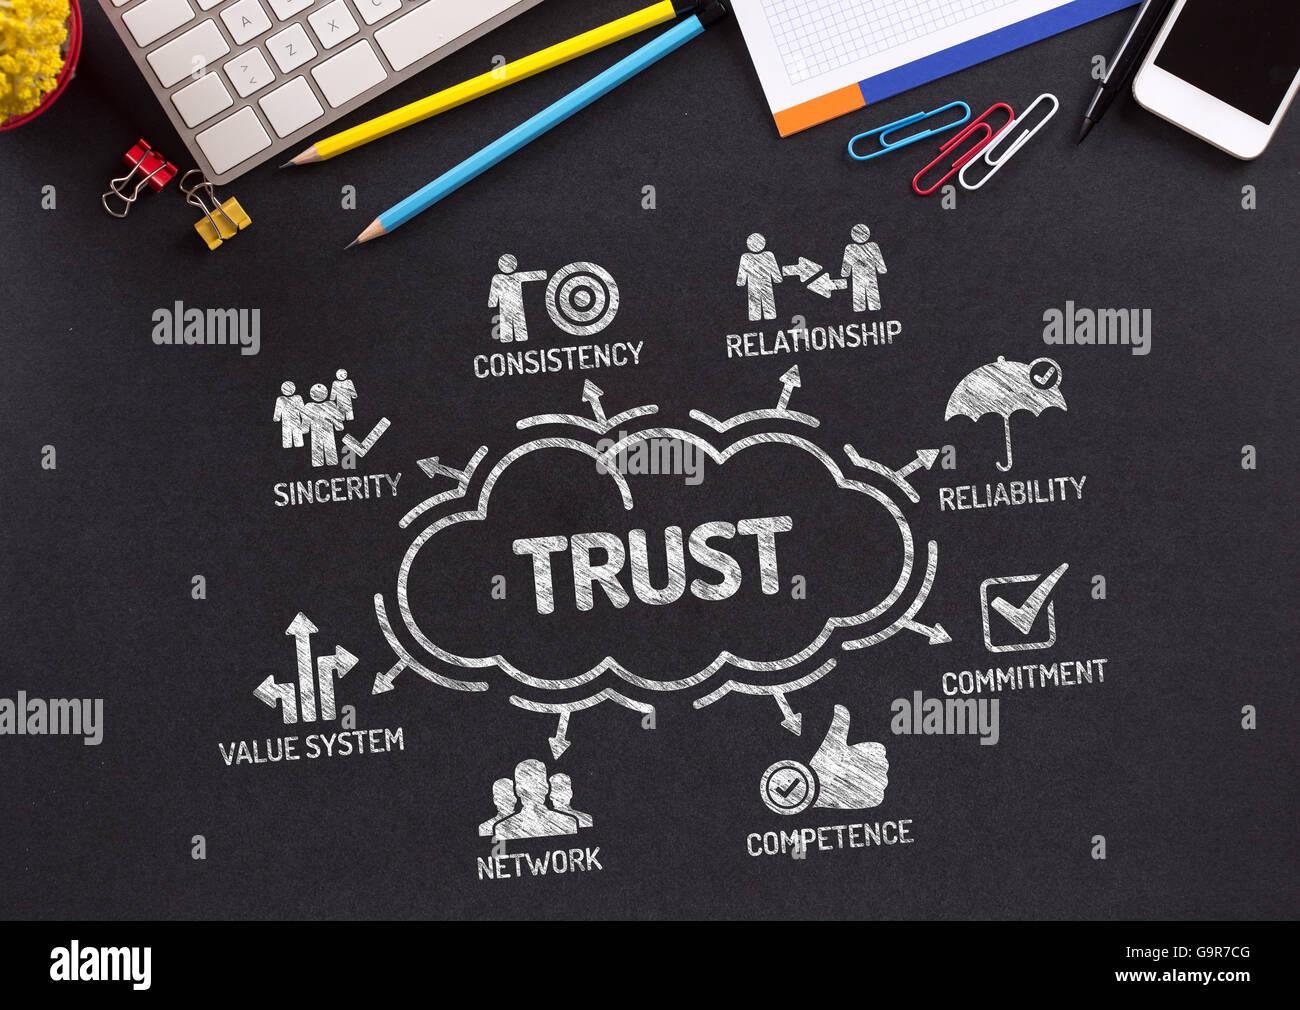 Trust Chart with keywords and icons on blackboard Stock Photo